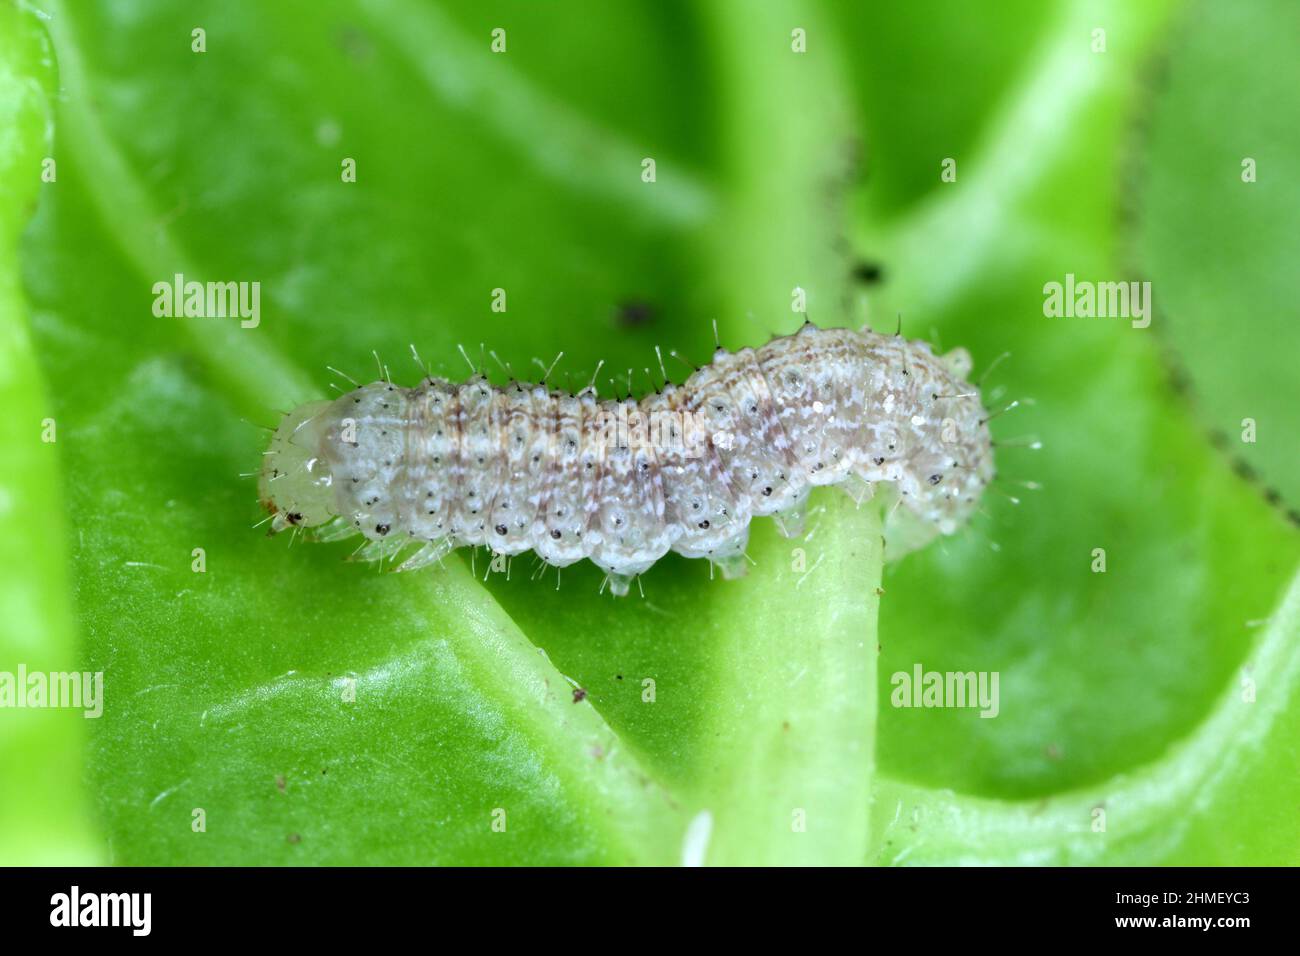 A close up image of a young Cabbage Moth caterpillar, Mamestra brassicae consuming a sugar beet leaf. Stock Photo